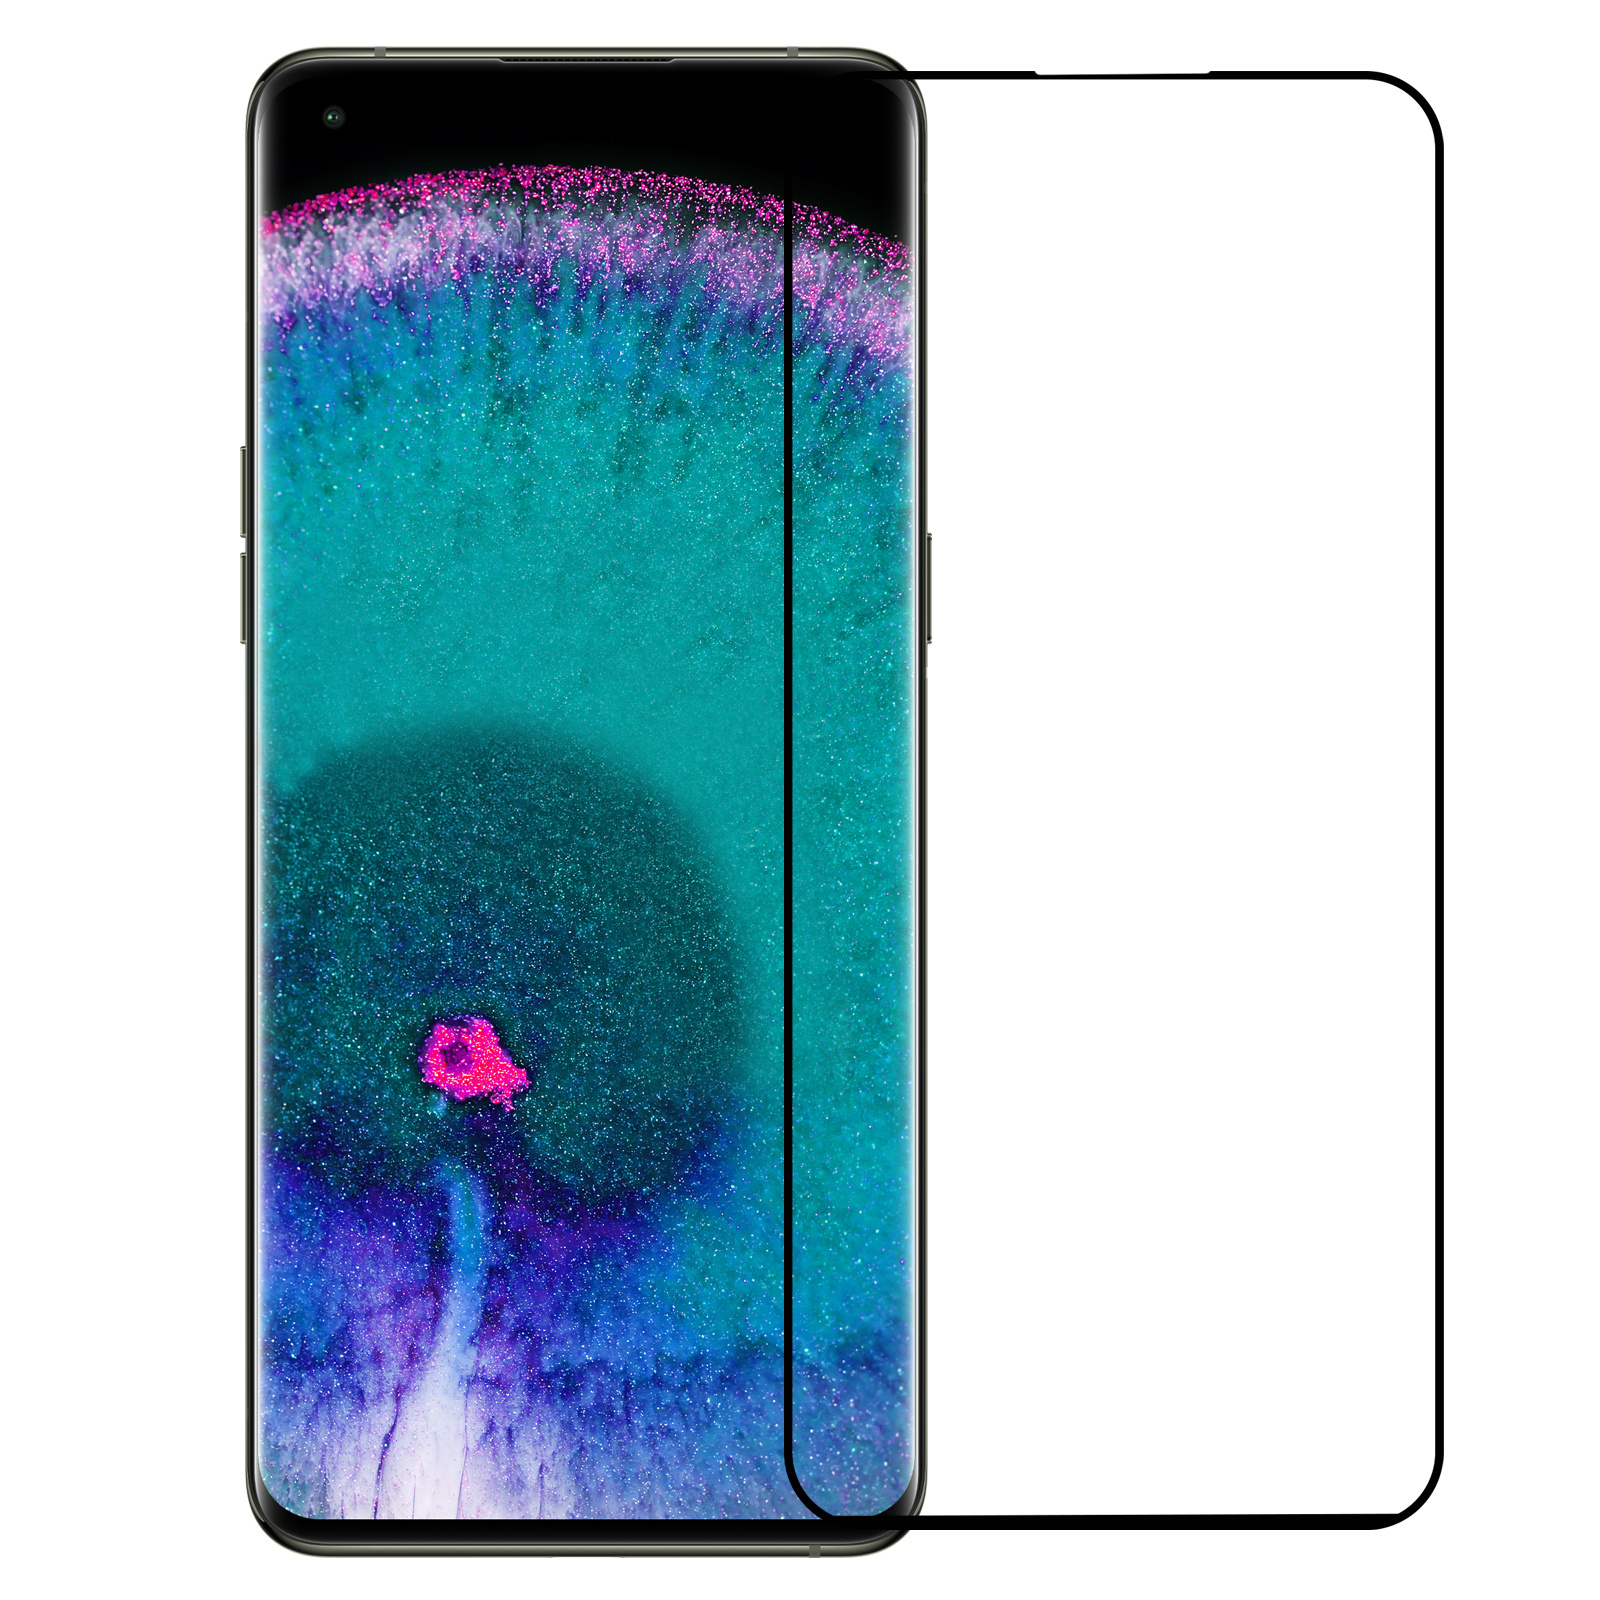 Nomfy OPPO Find X5 Pro Hoesje Siliconen Case Back Cover Met 2x Screenprotector - OPPO Find X5 Pro Hoes Cover Silicone - Groen